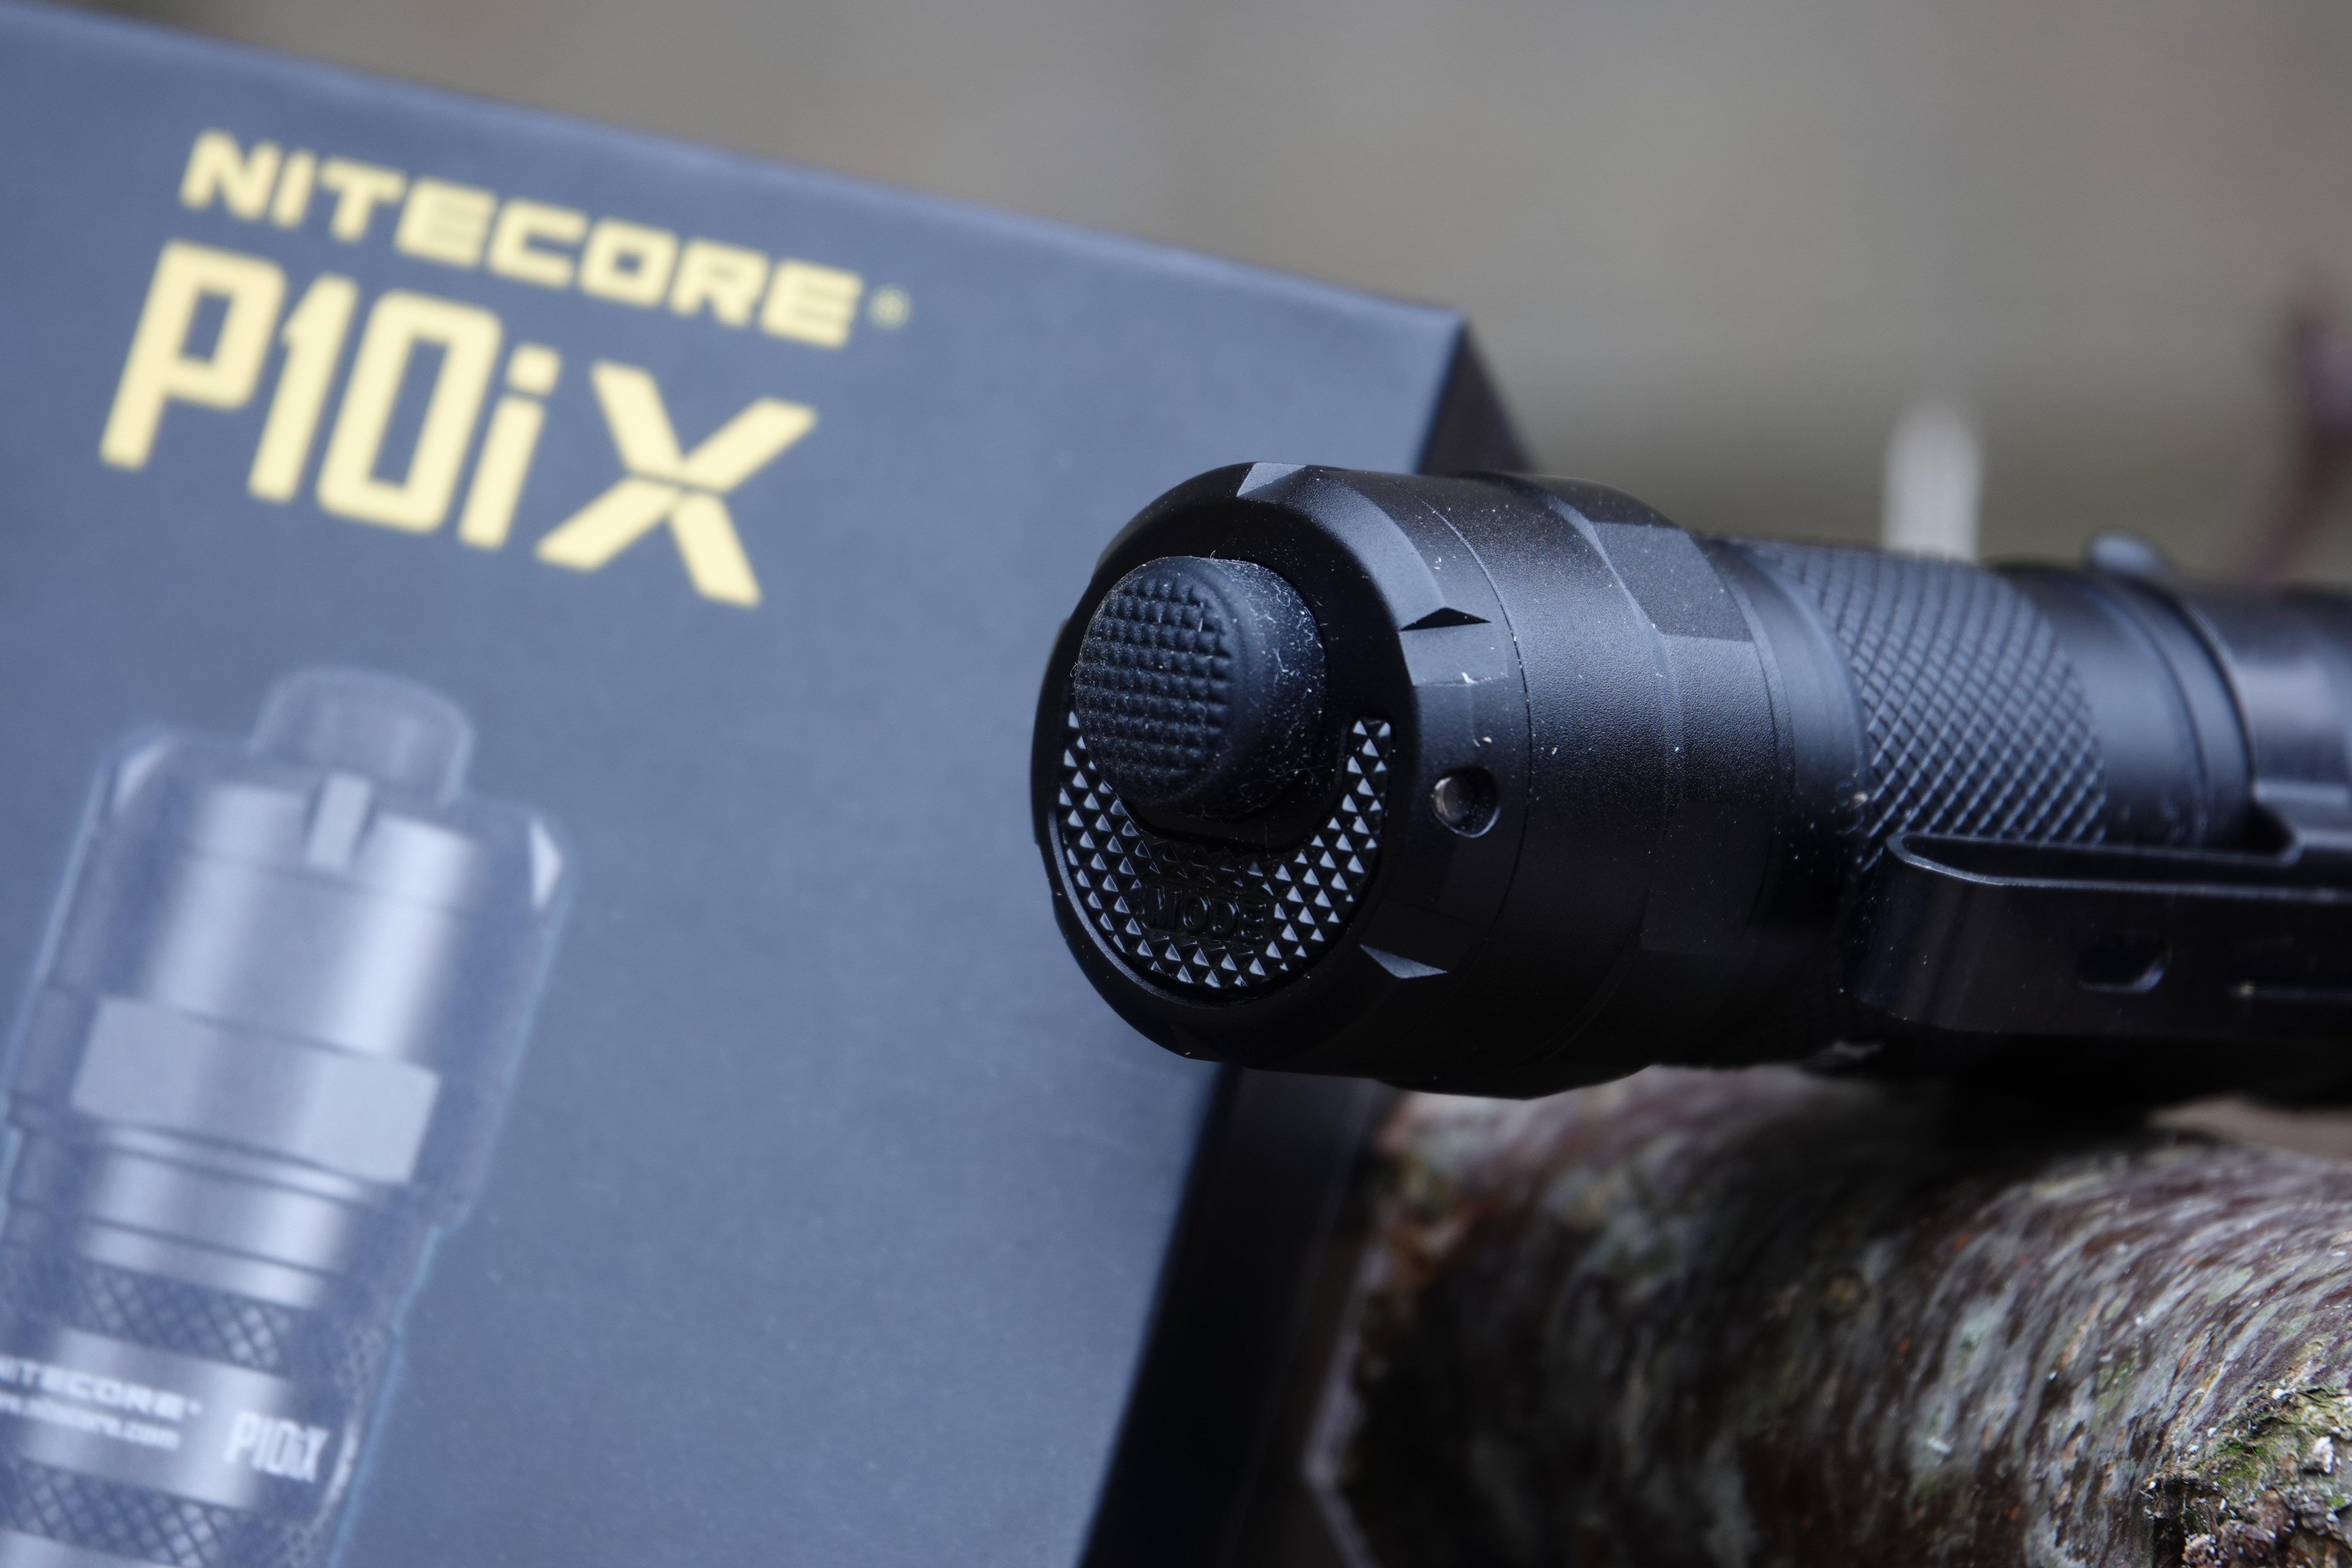 Review: Nextorch TA30C - a duty light with an interesting user interface -  18650 Flashlights 